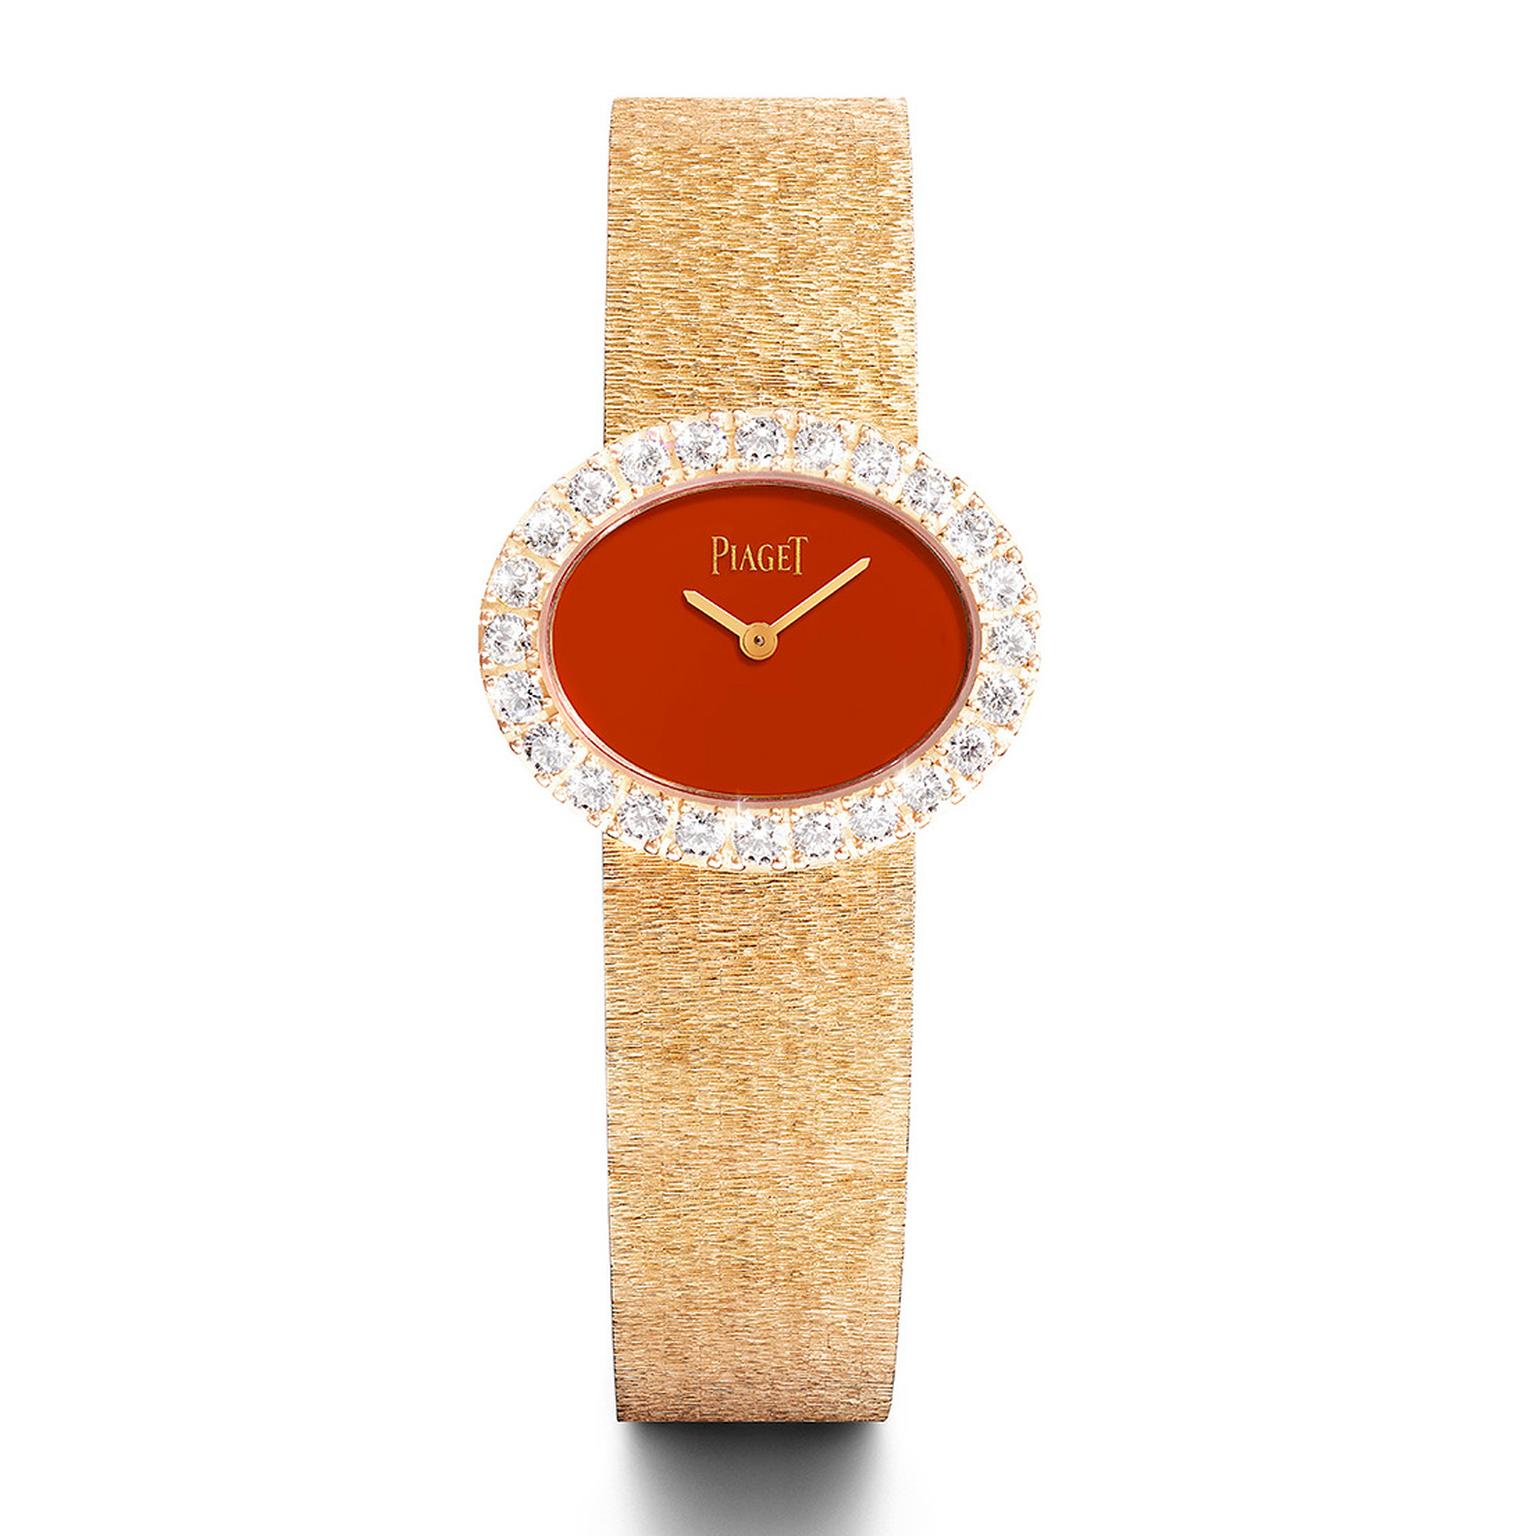 Piaget gold and diamond watch with red cornelian dial